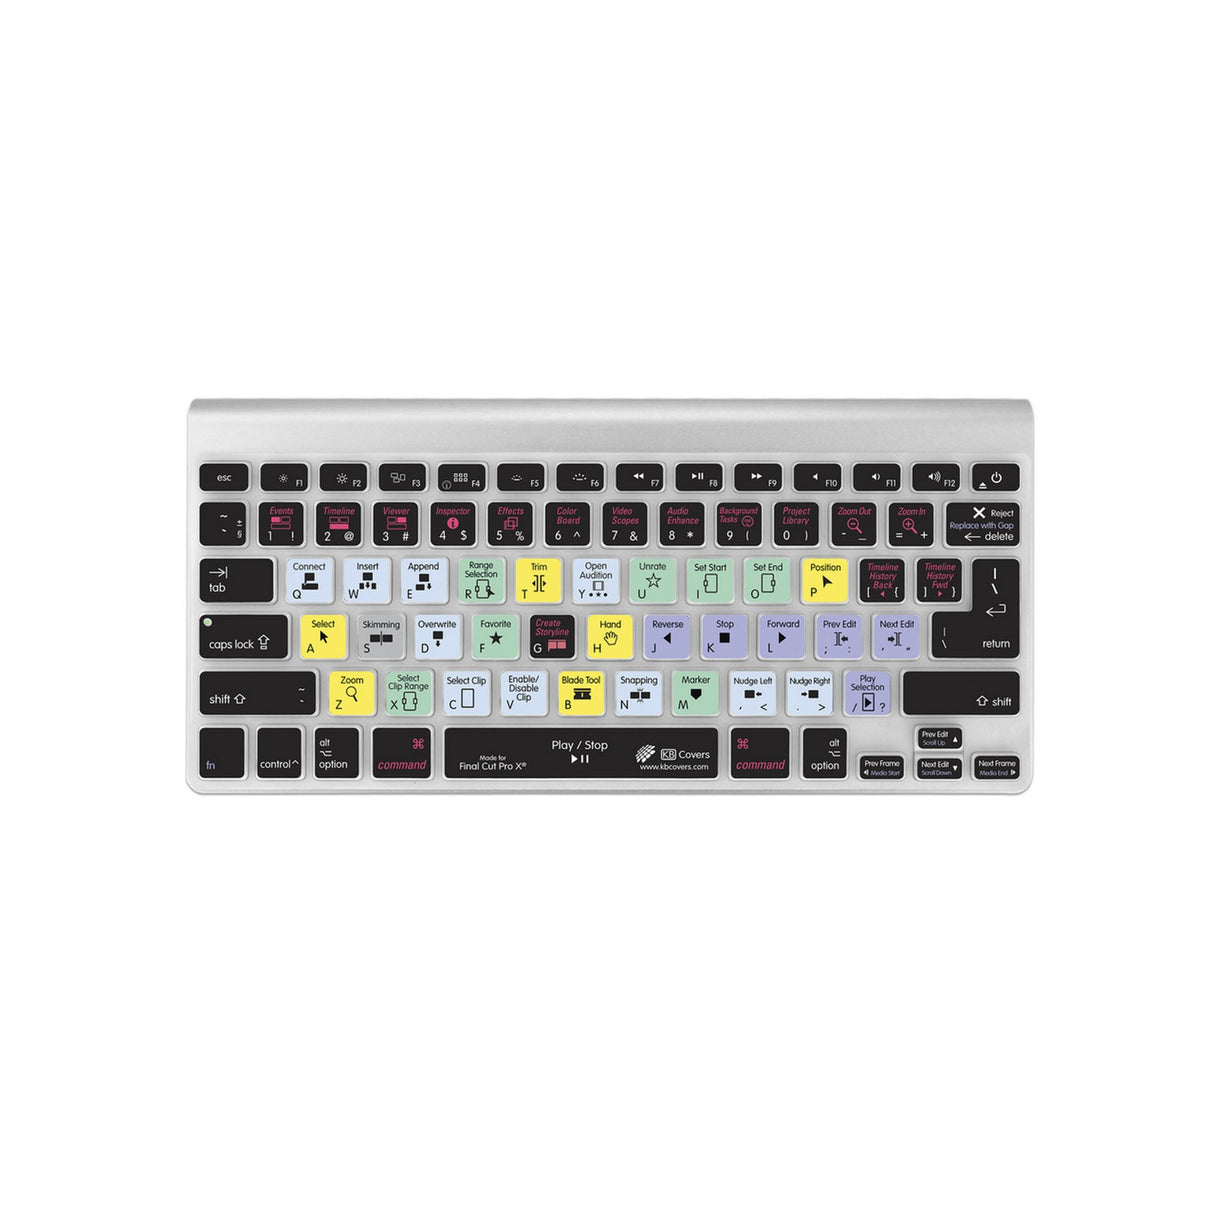 KB Covers FCPX-M-CC-2 Final Cut Pro X Keyboard Cover for MacBook/Air 13/Pro 2008+/Retina and Wireless (Used)